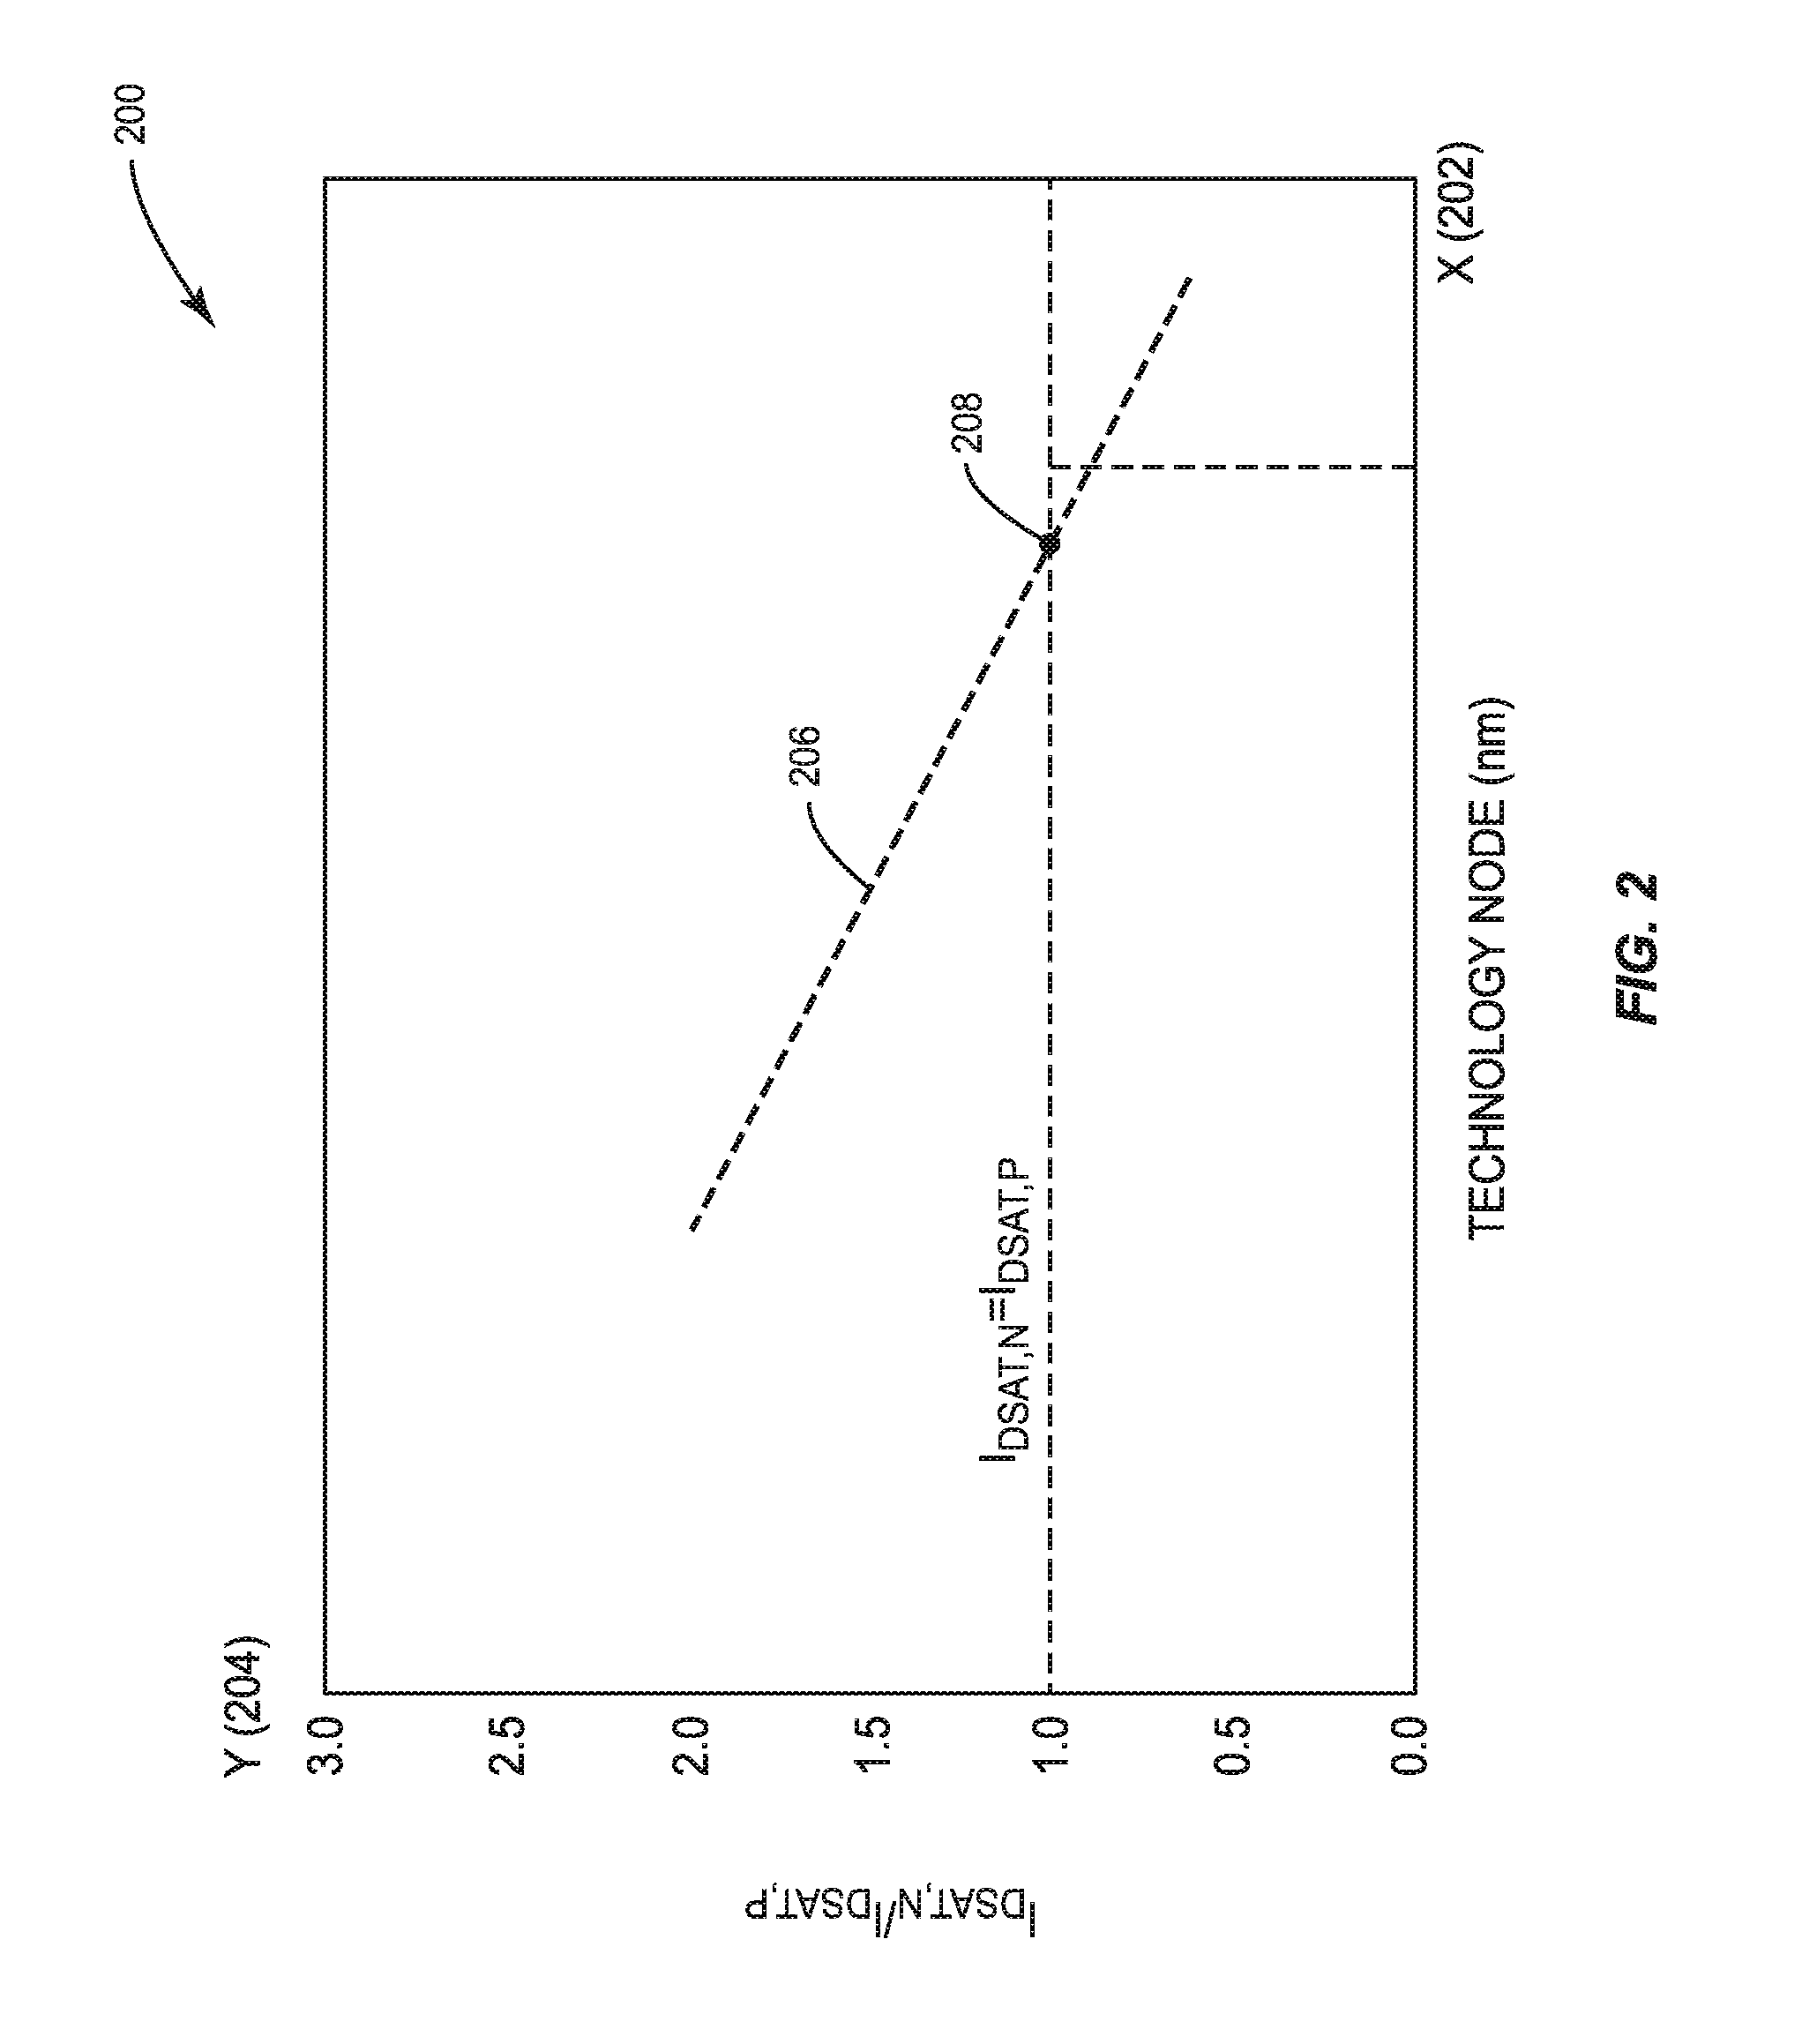 Dynamic tag compare circuits employing p-type field-effect transistor (PFET)-dominant evaluation circuits for reduced evaluation time, and related systems and methods